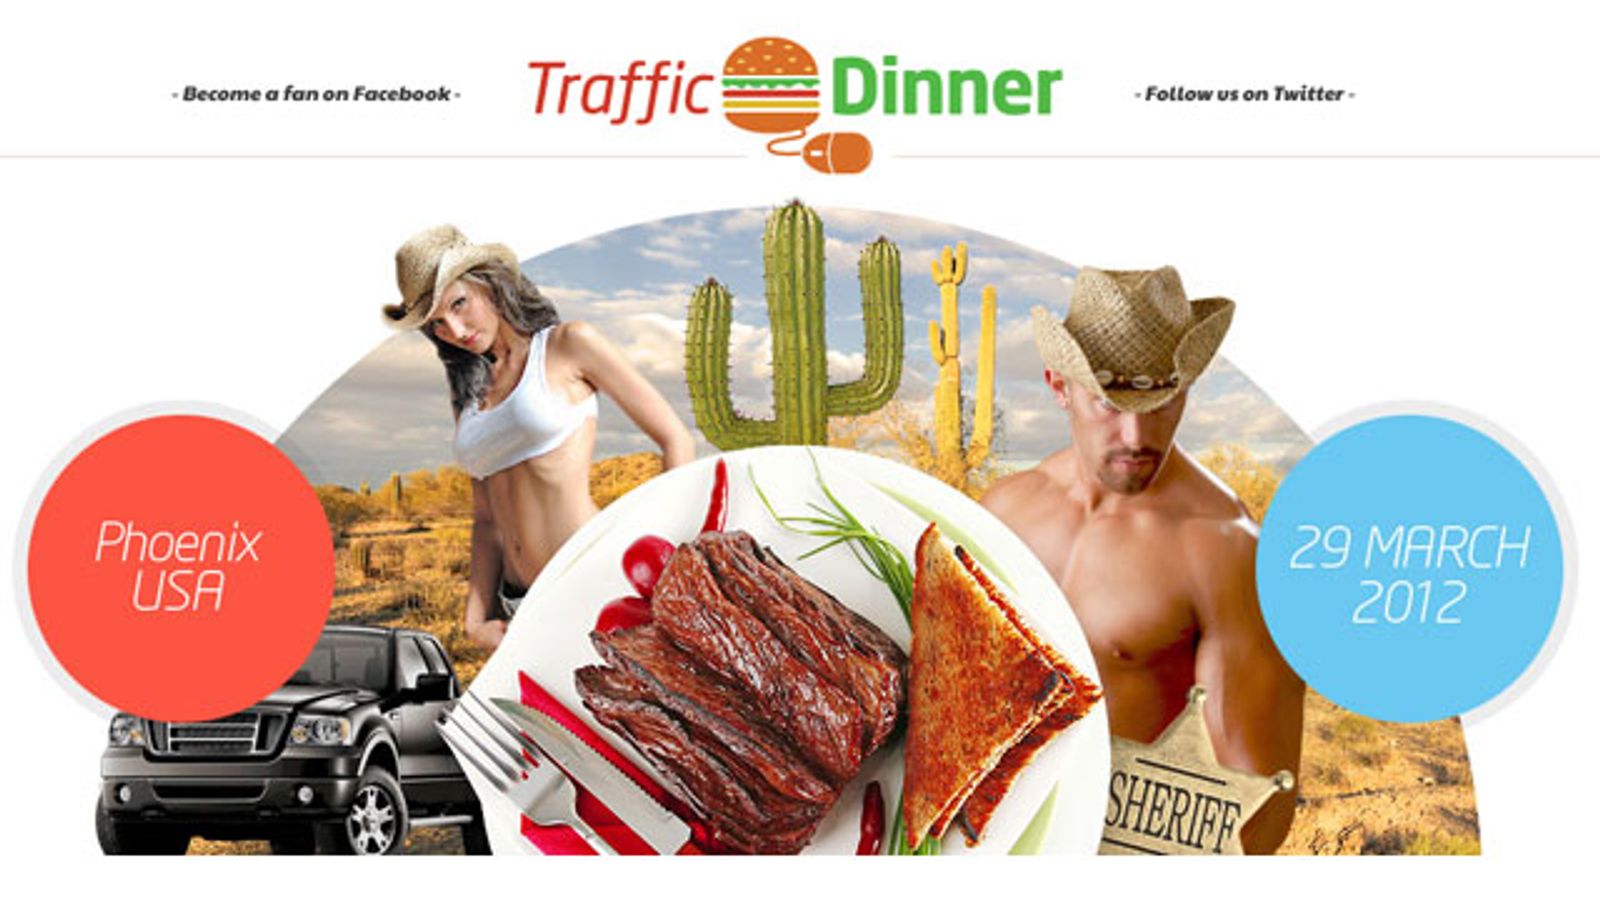 Traffic Dinner at Phoenix Forum Set for March 29